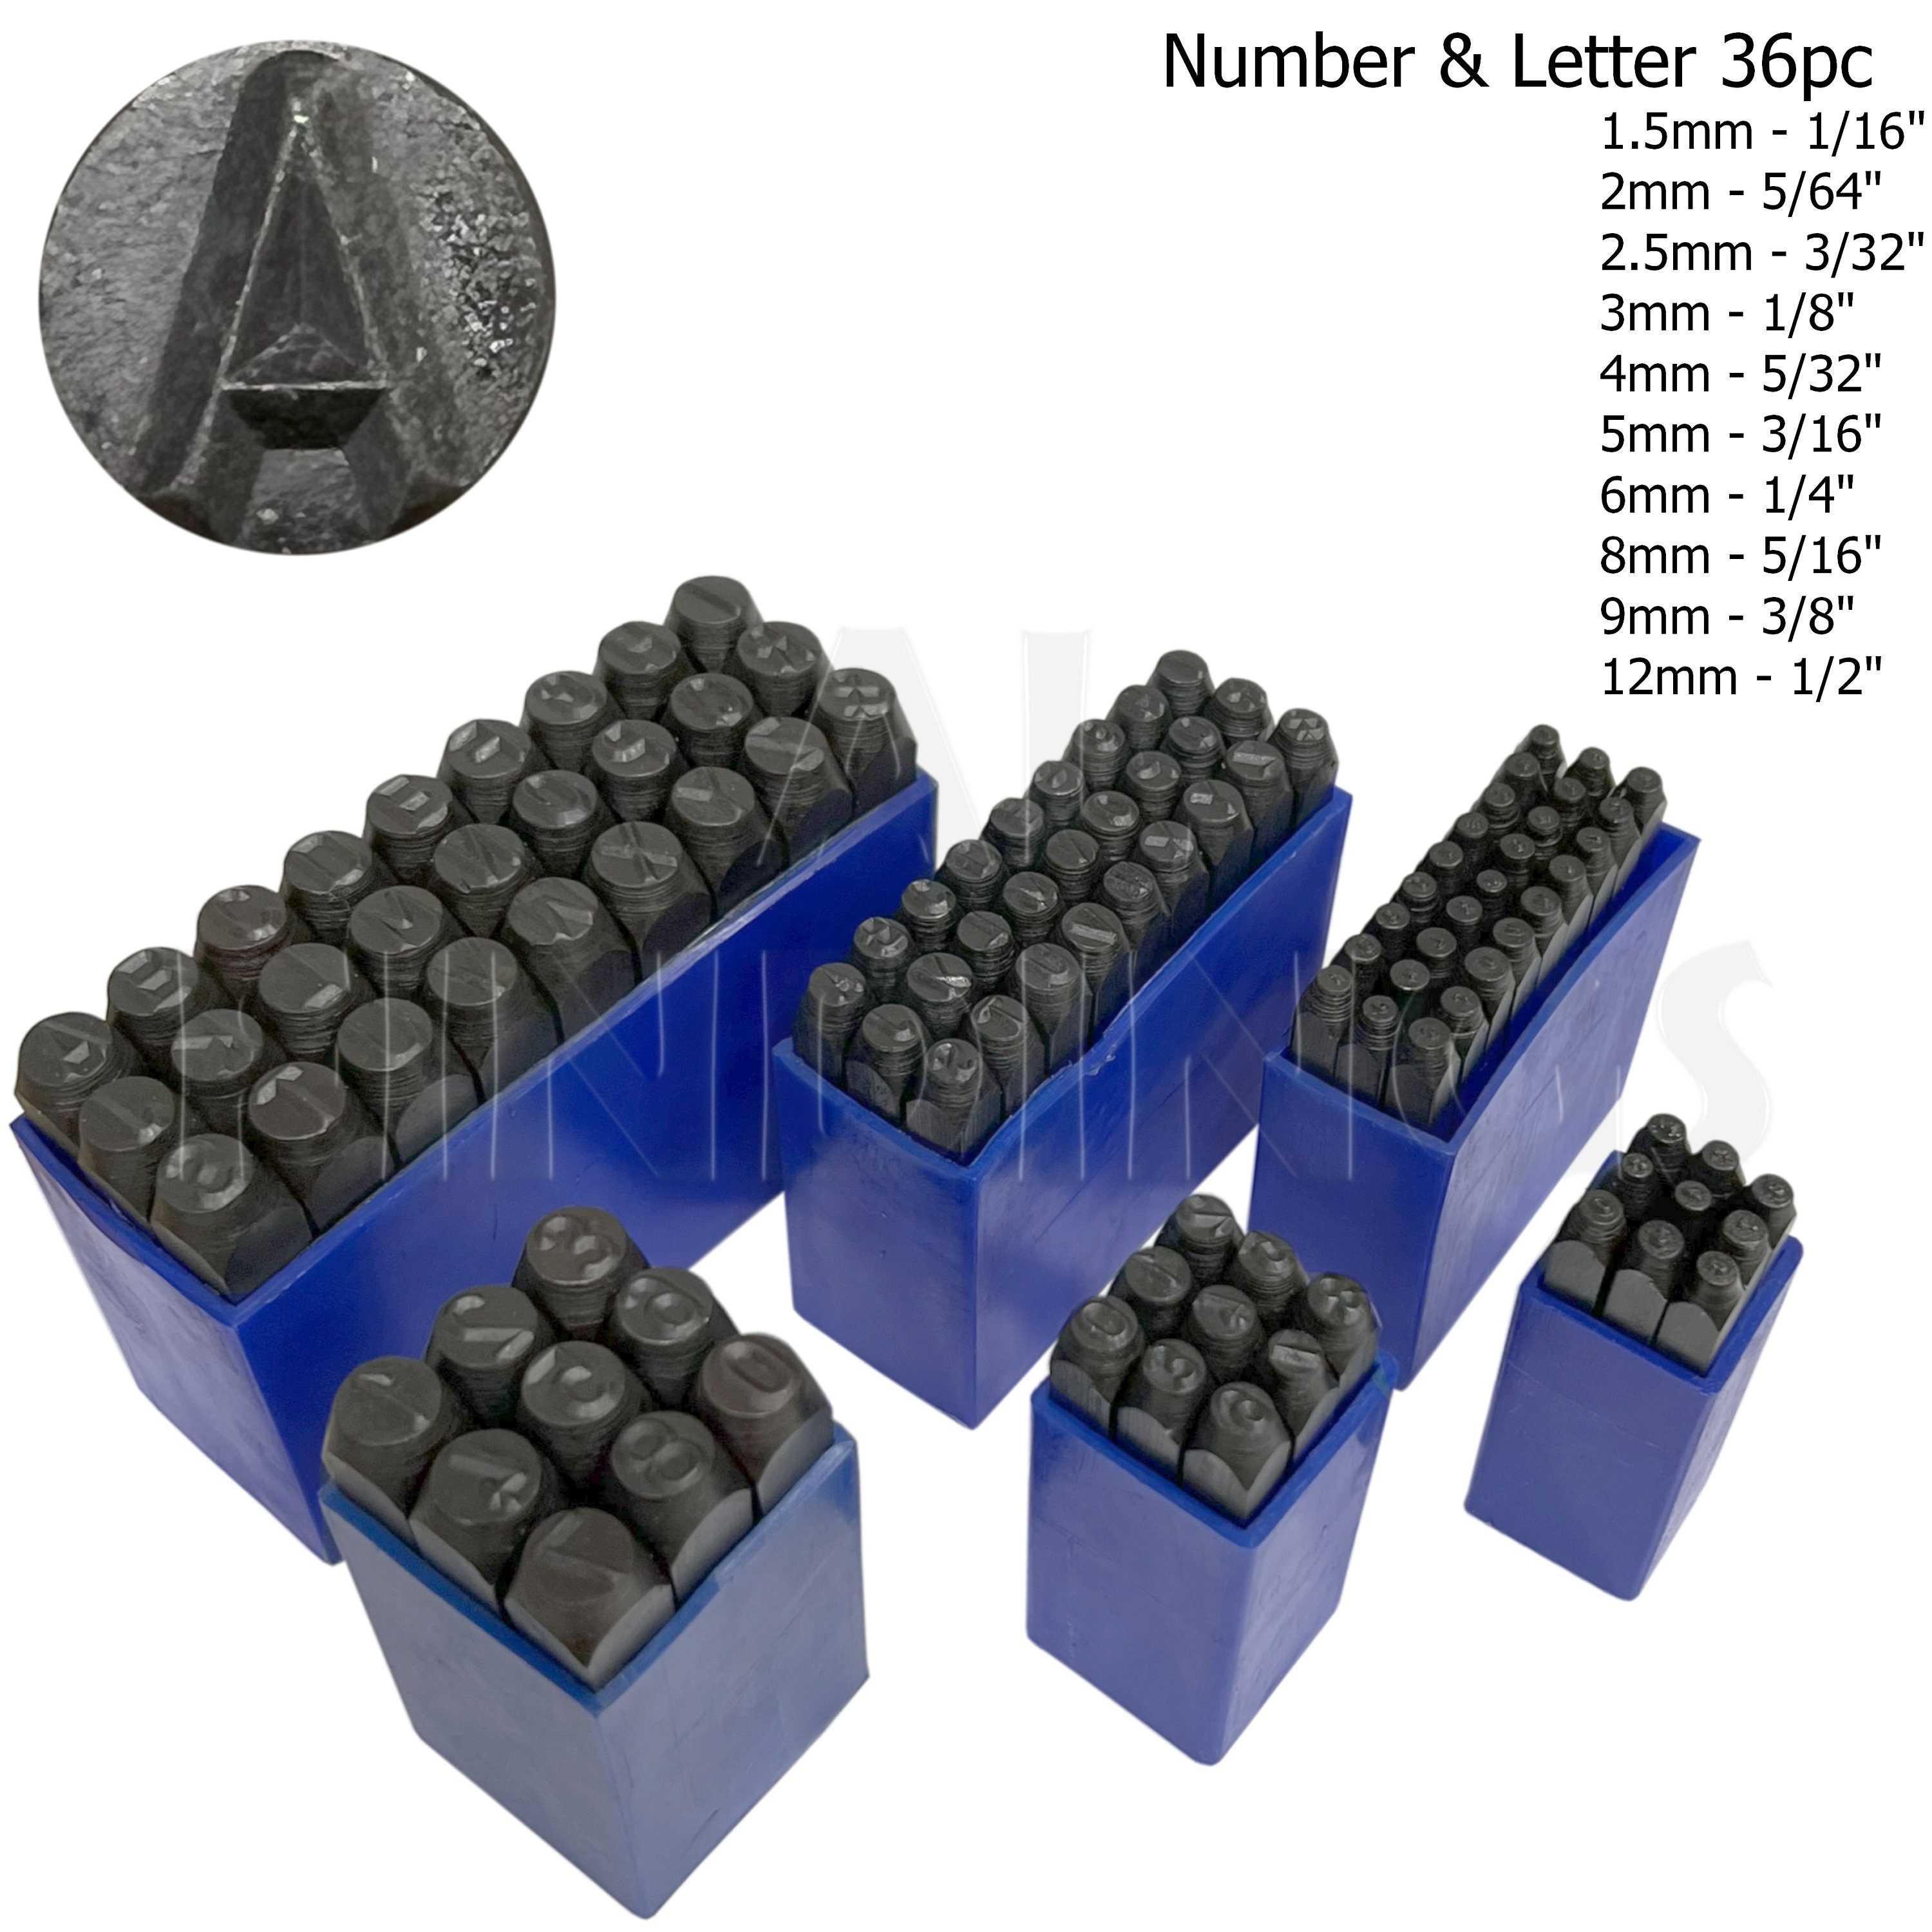 36pc Number Letter Stamp Punch Set for Imprinting Metal Leather